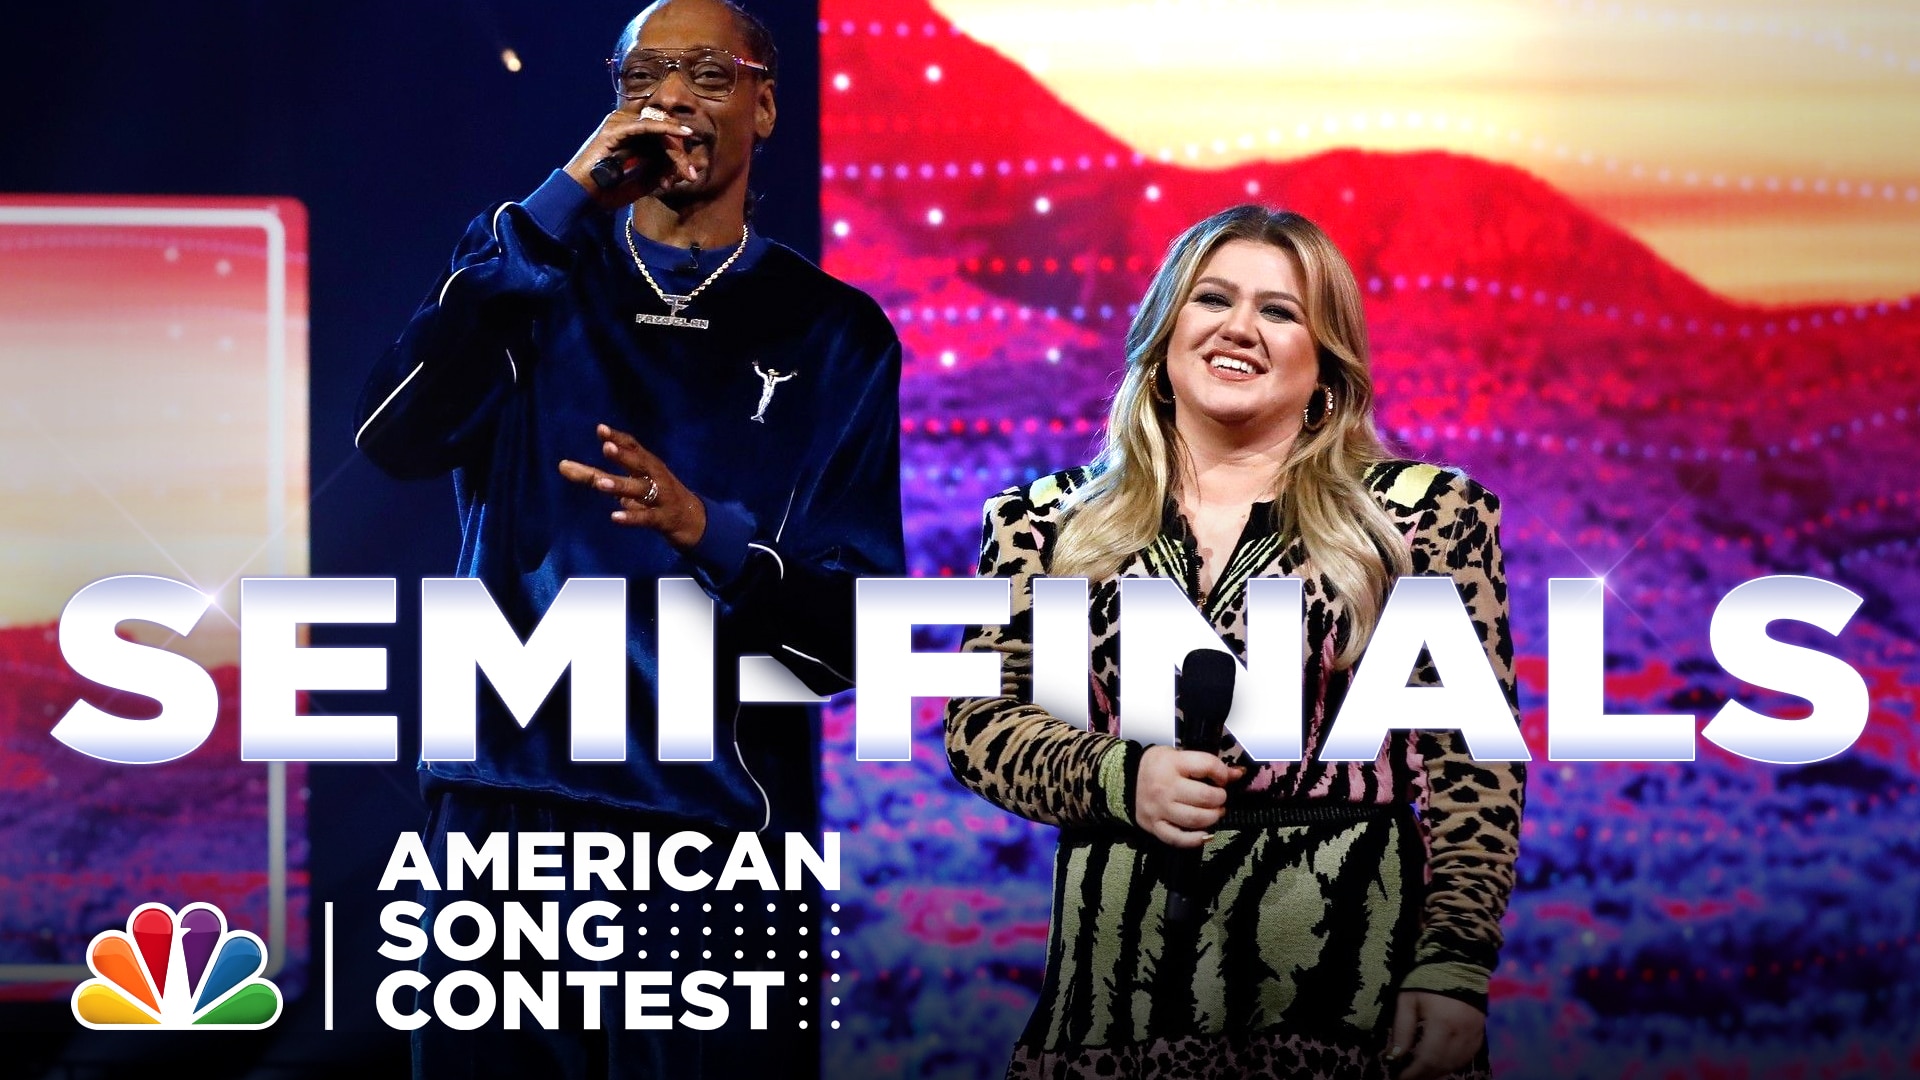 Watch American Song Contest Web Exclusive The Next Level of